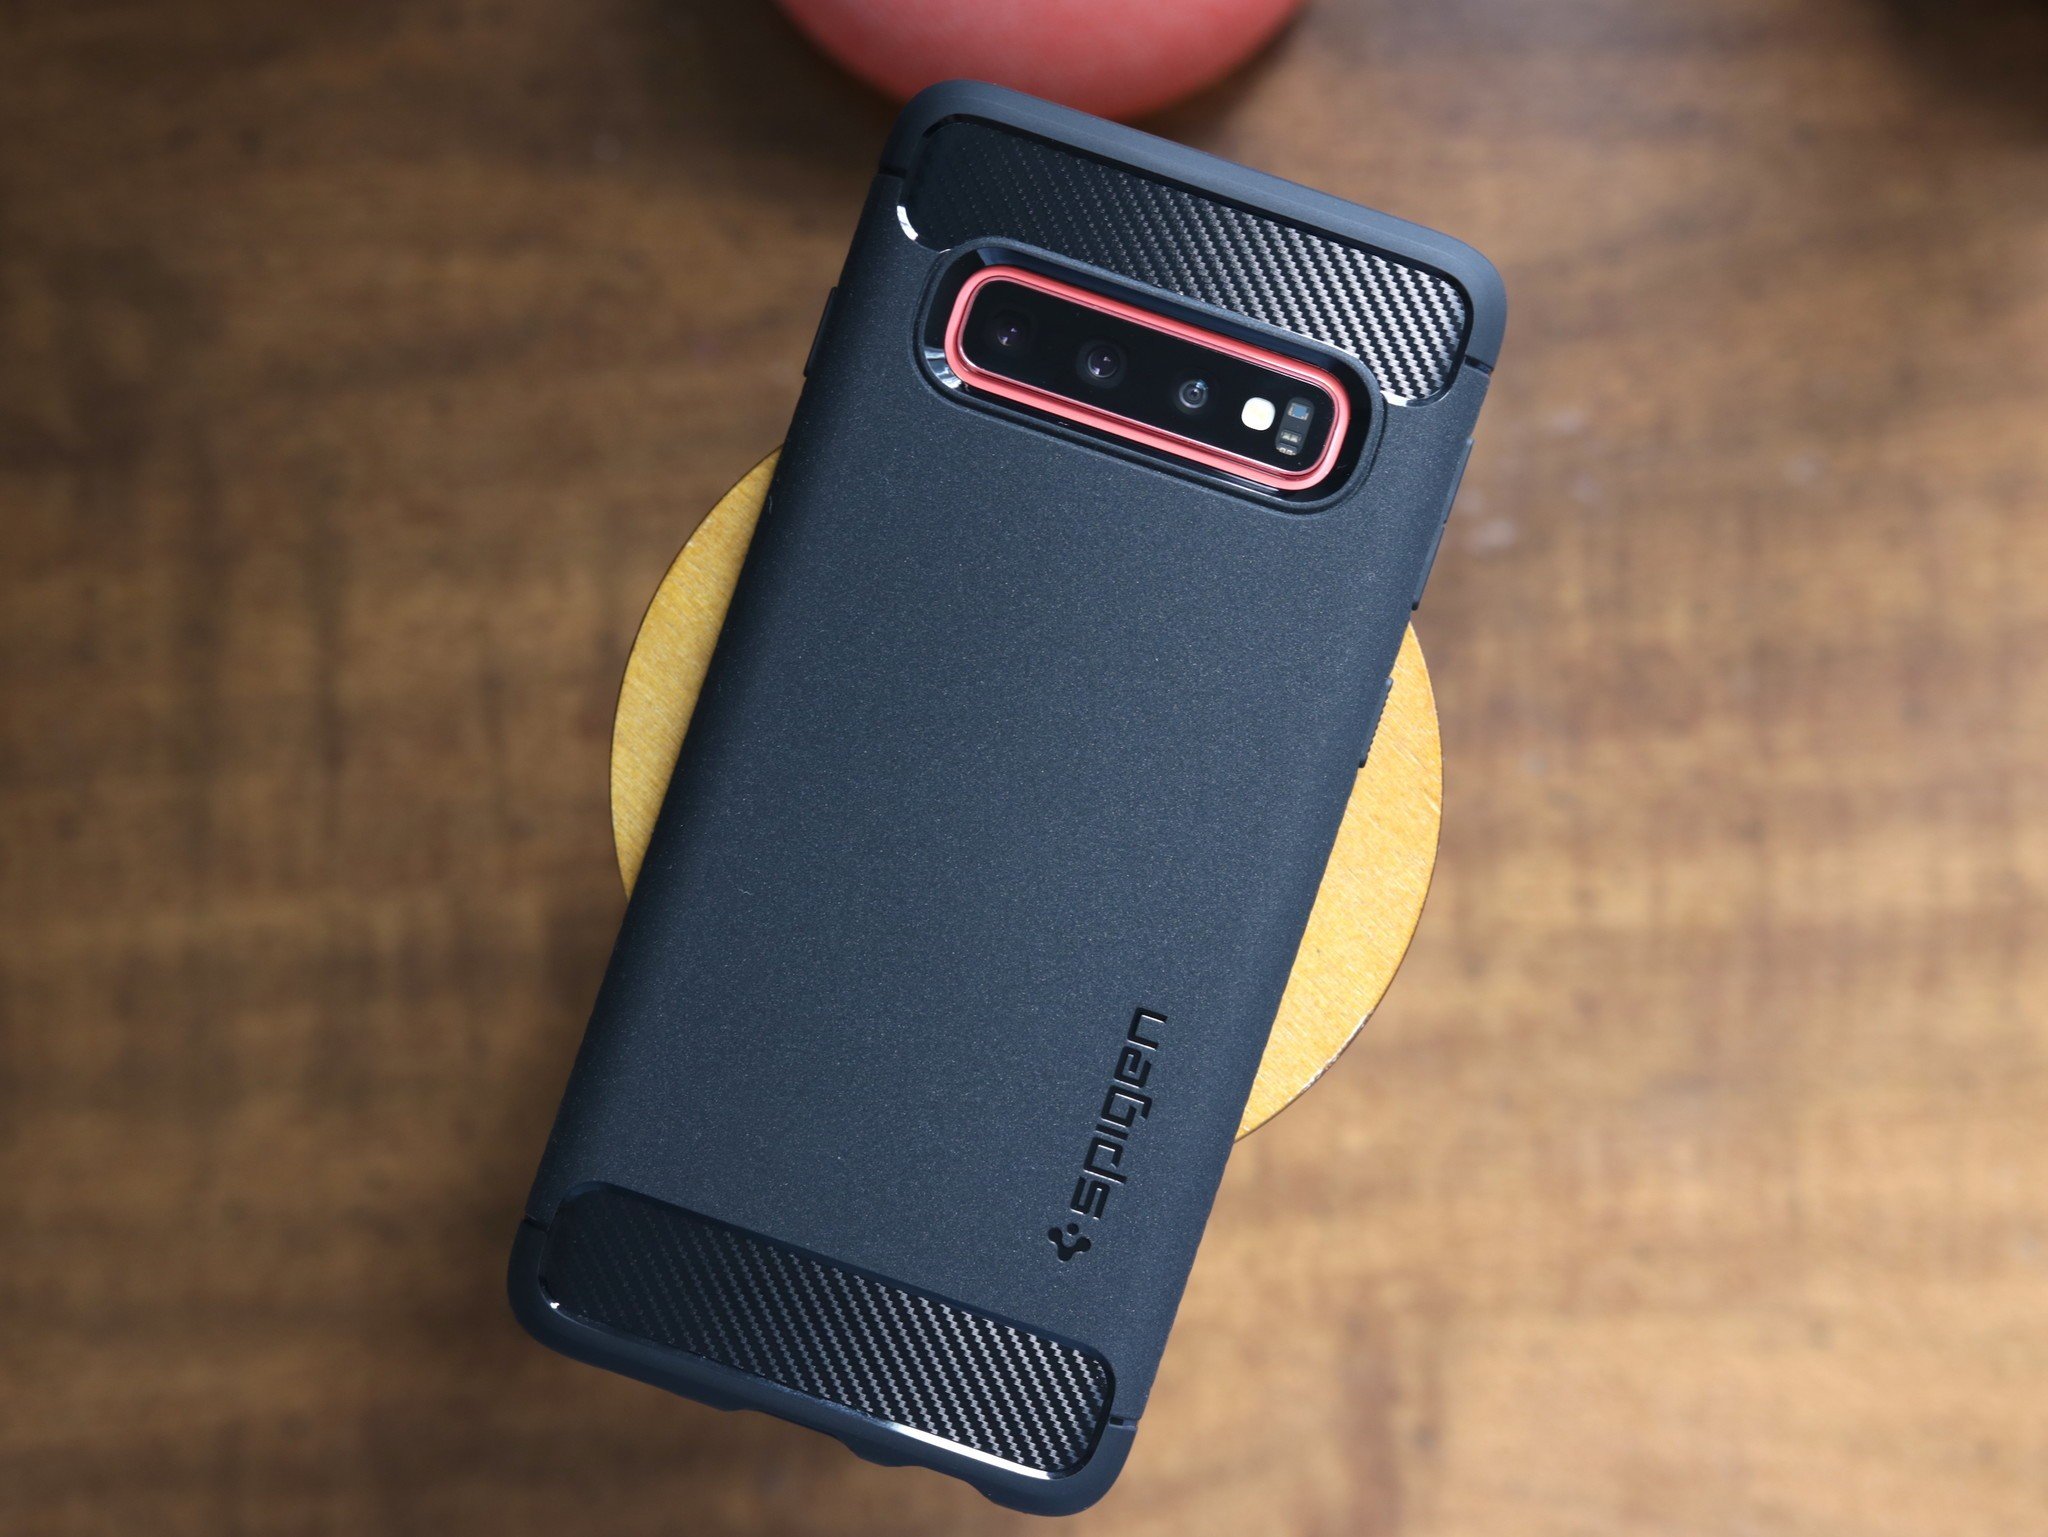 Doe een poging Componeren knoflook Spigen Rugged Armor Galaxy S10 case review: Simply great | Android Central